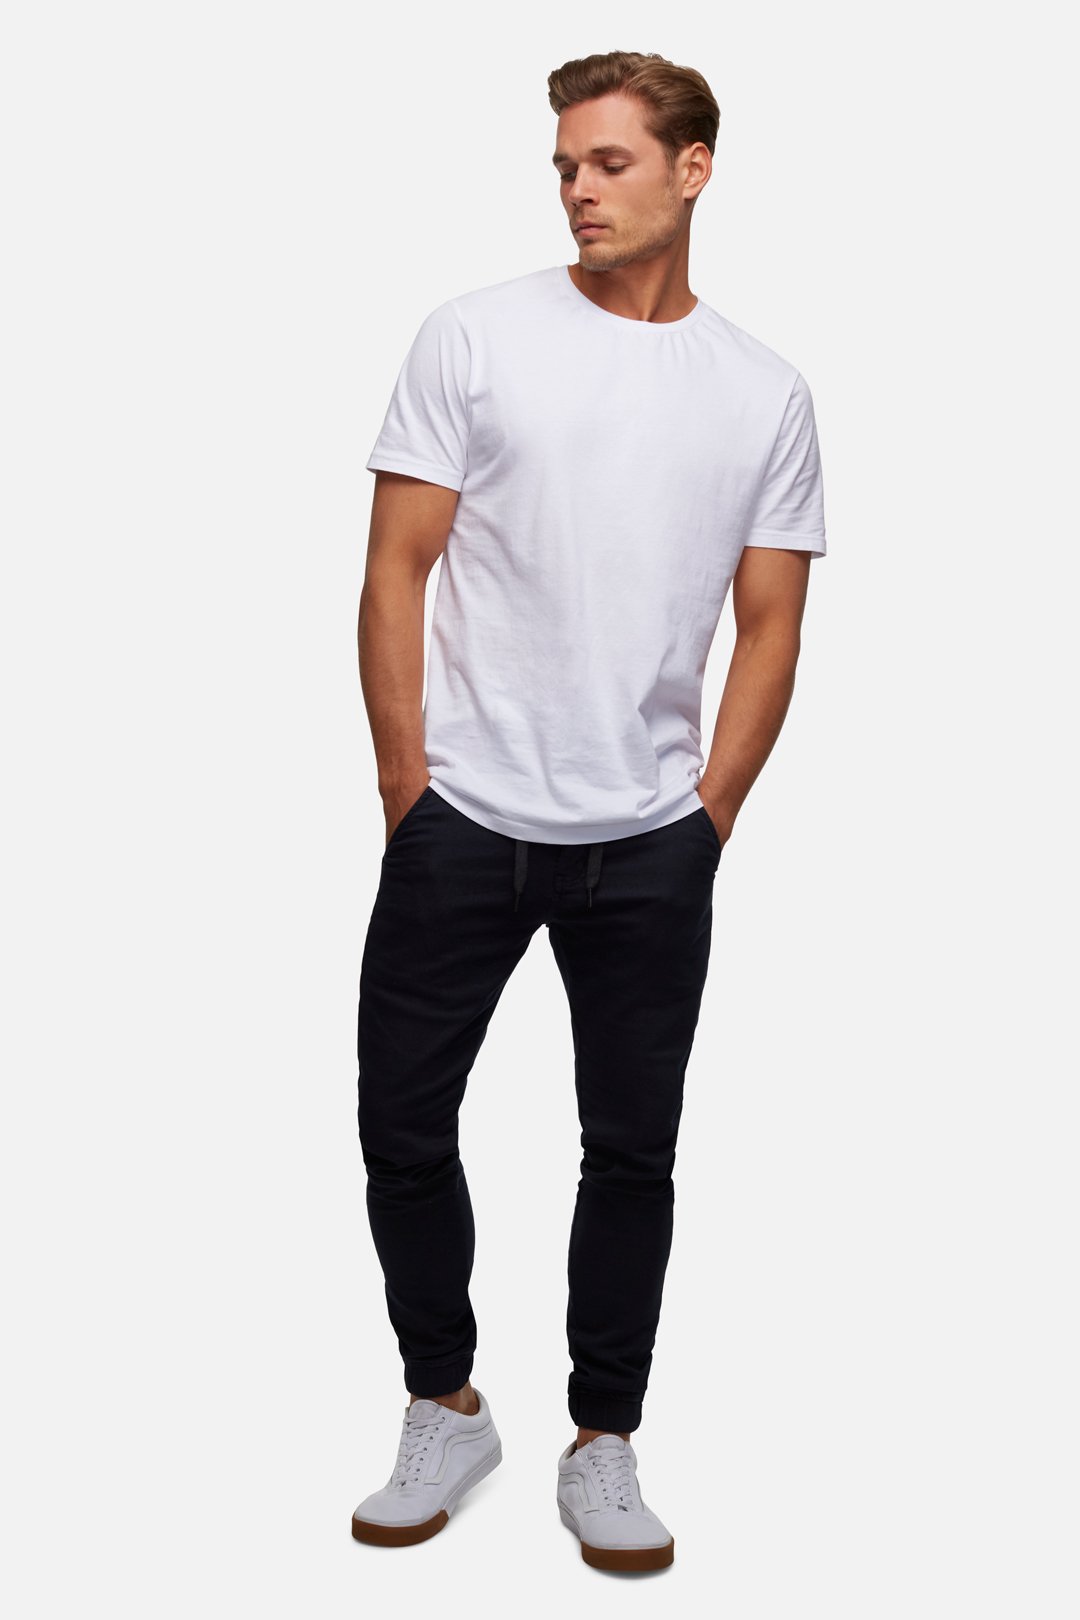 INDUSTRIE THE DRIFTER CHINO PANT RAW